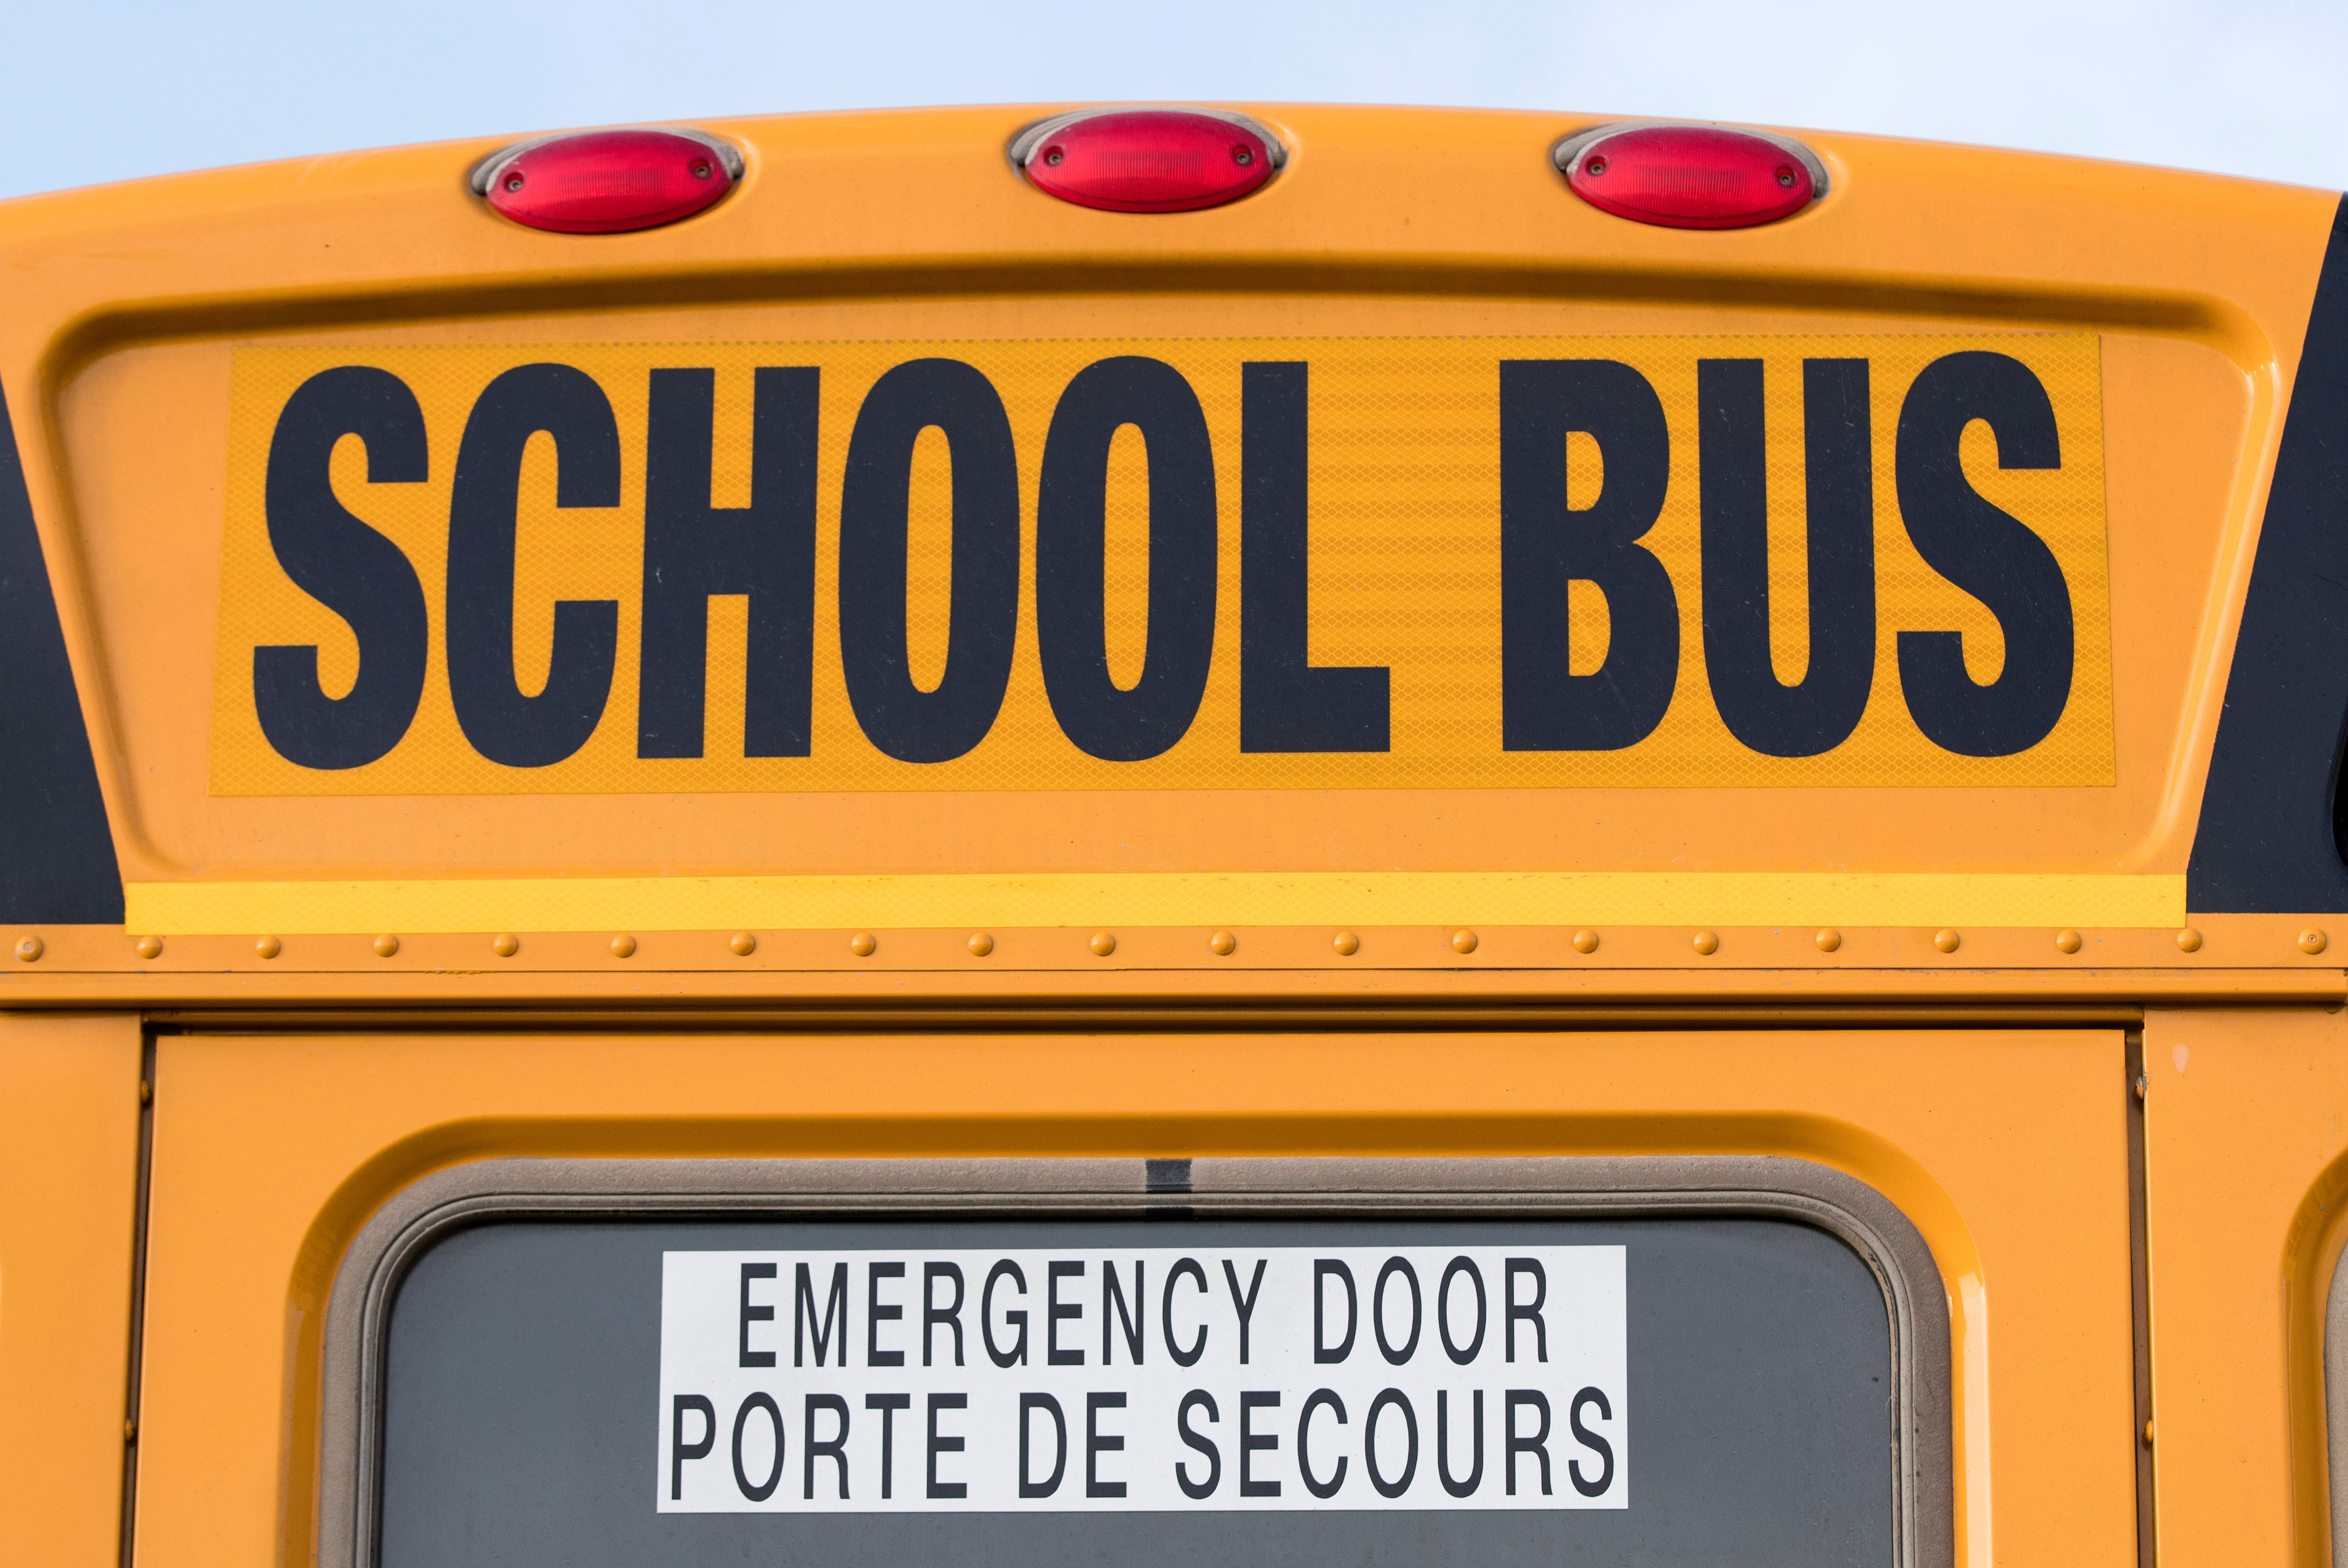 At 7:18 a.m. Monday, OPP say they were called to investigate after a school bus rear-ended a grey car on Highway 10, south of Flesherton, Ont., in Grey County.